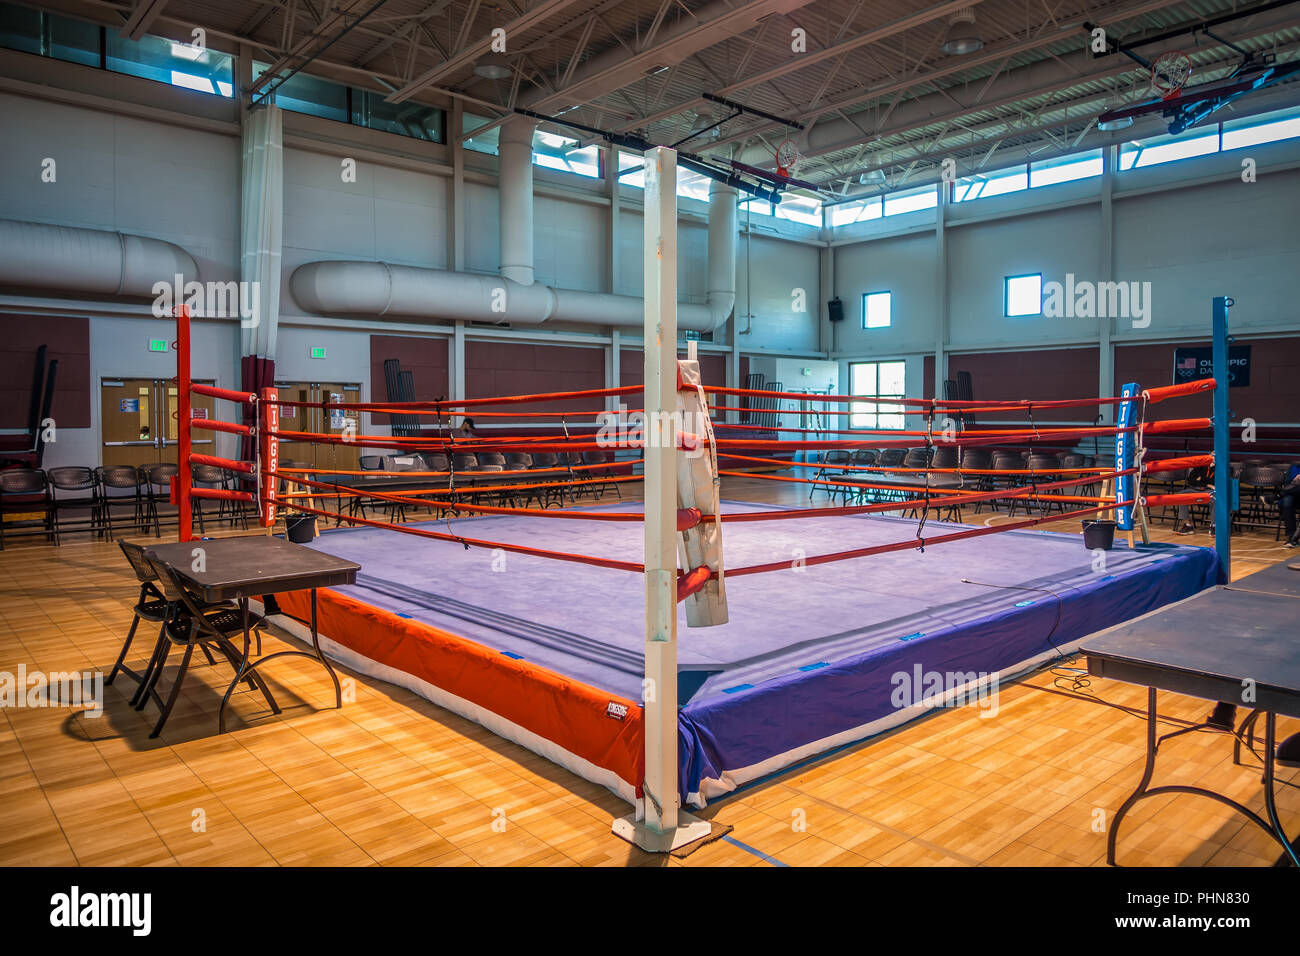 boxing ring arena in gym before action Stock Photo